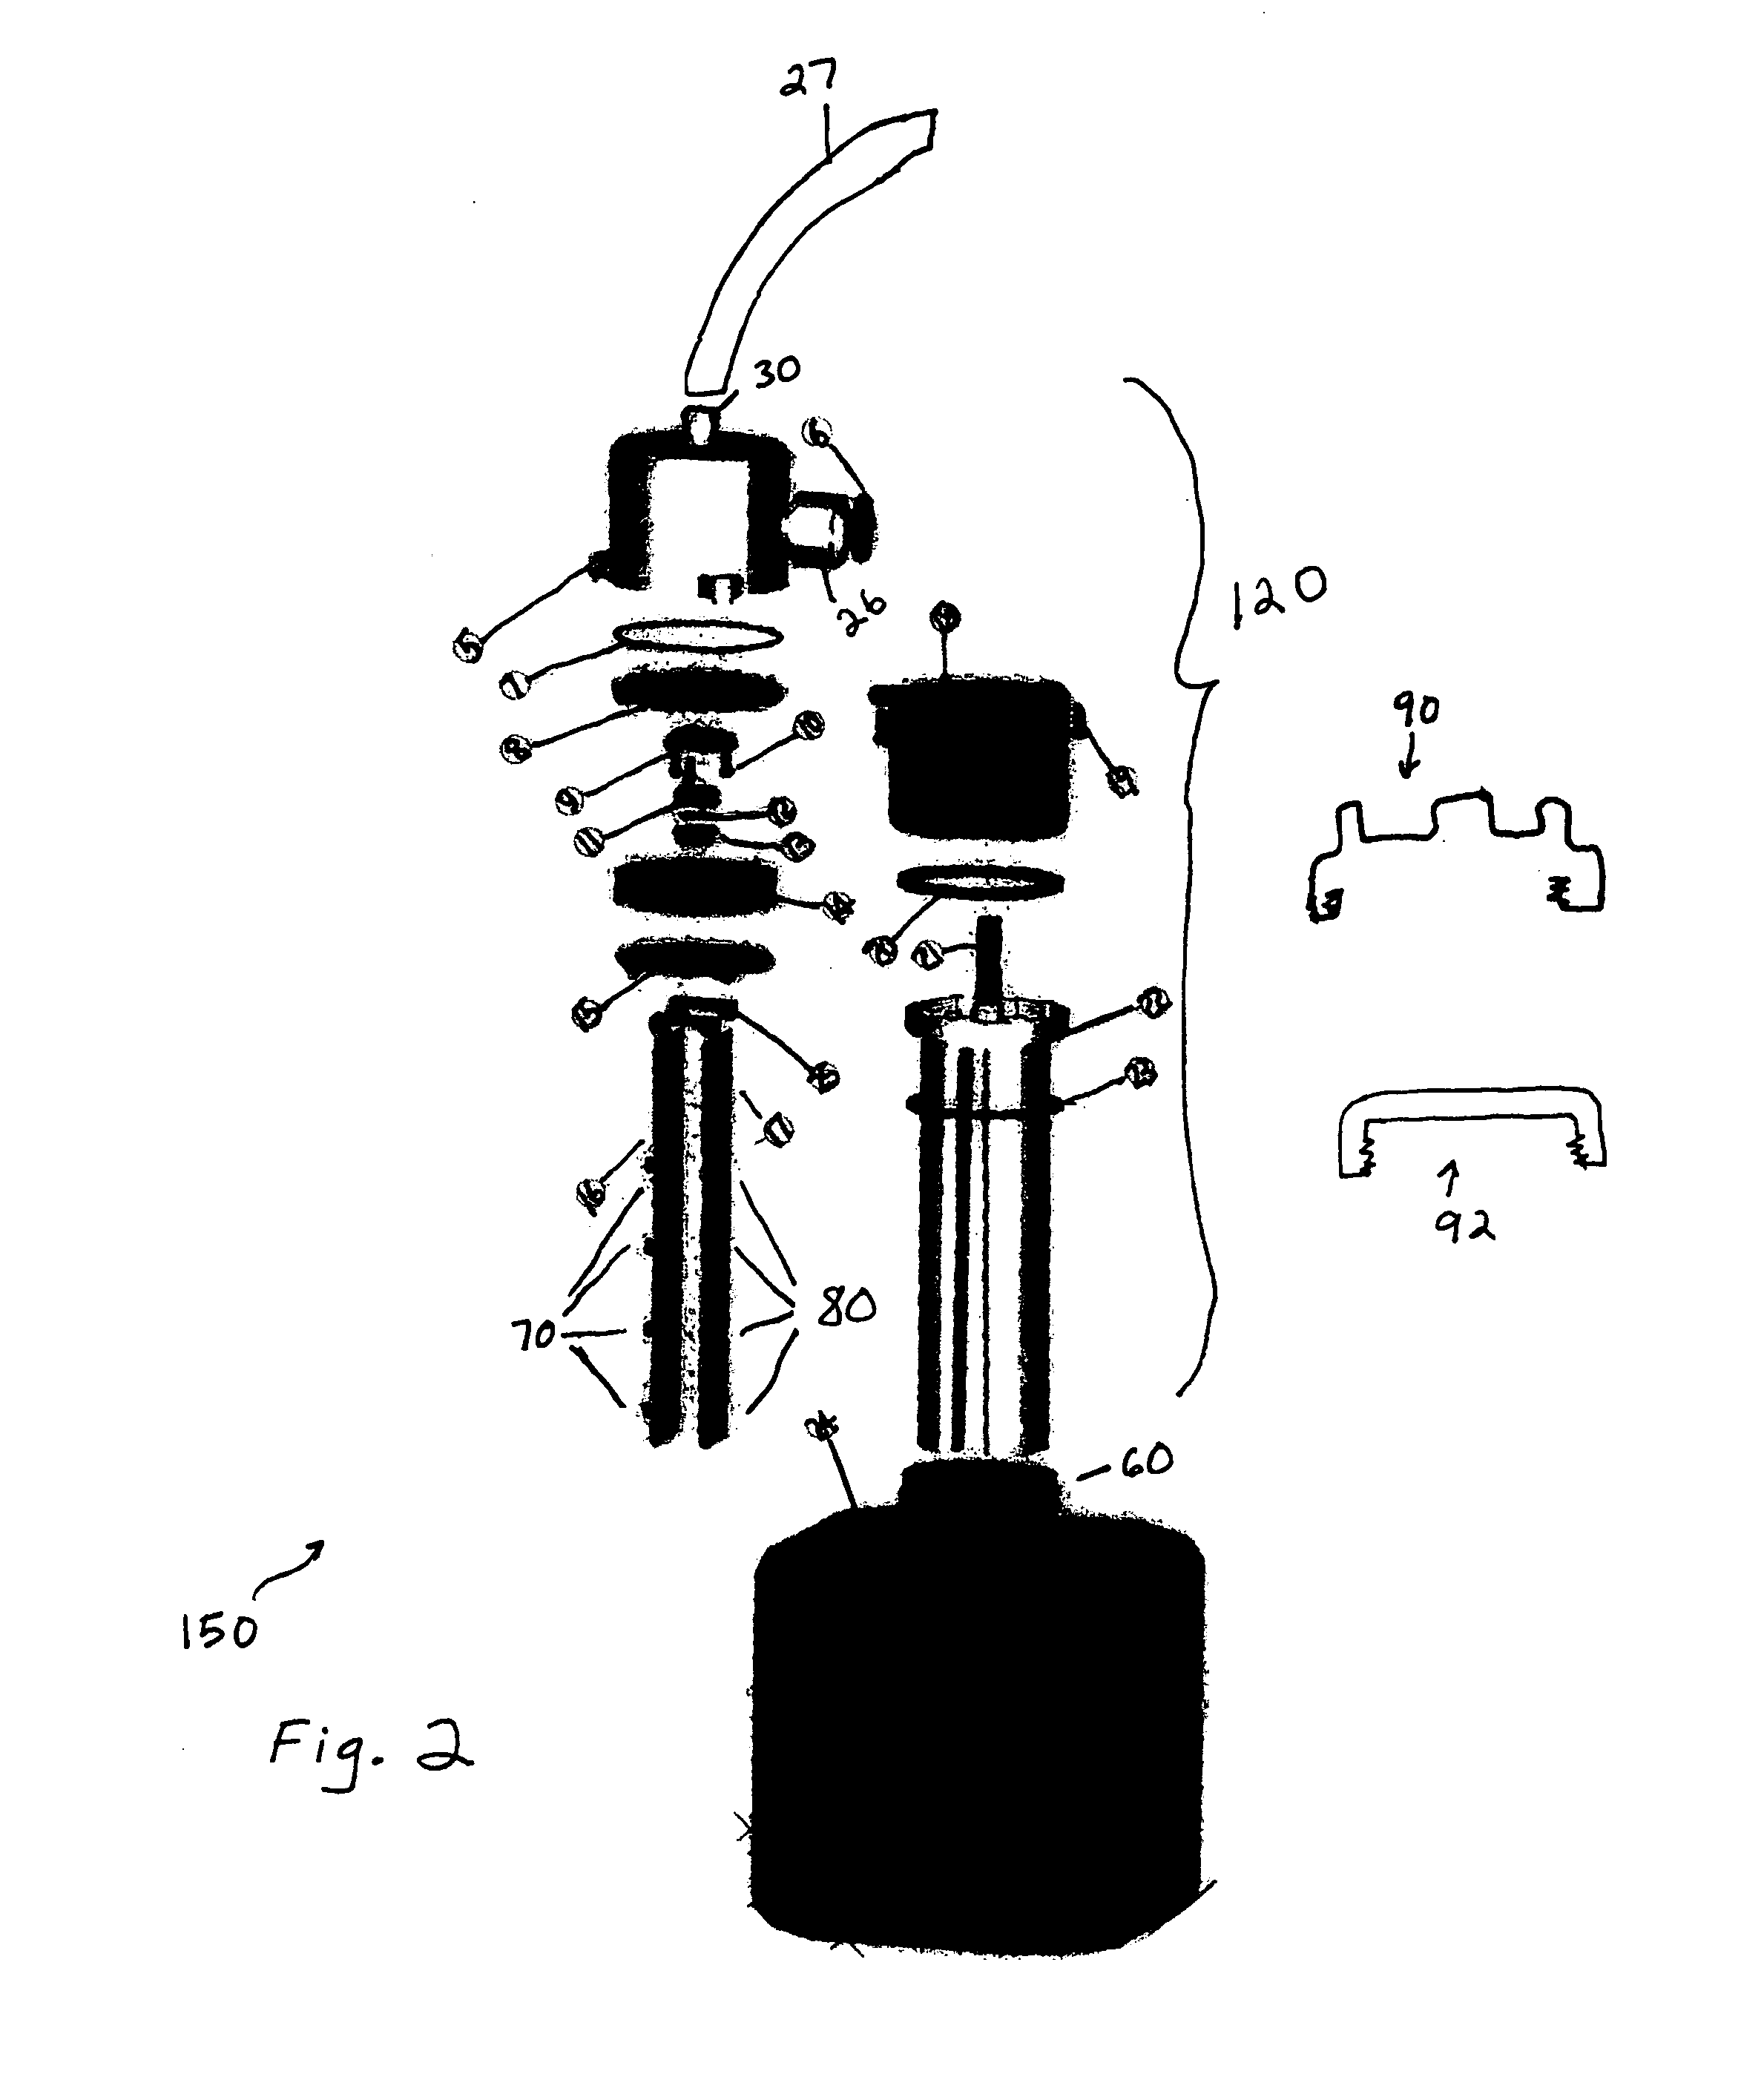 Fuel combustion catalyst microburst aerosol delivery device and continuous and consistent aerosol delivery device